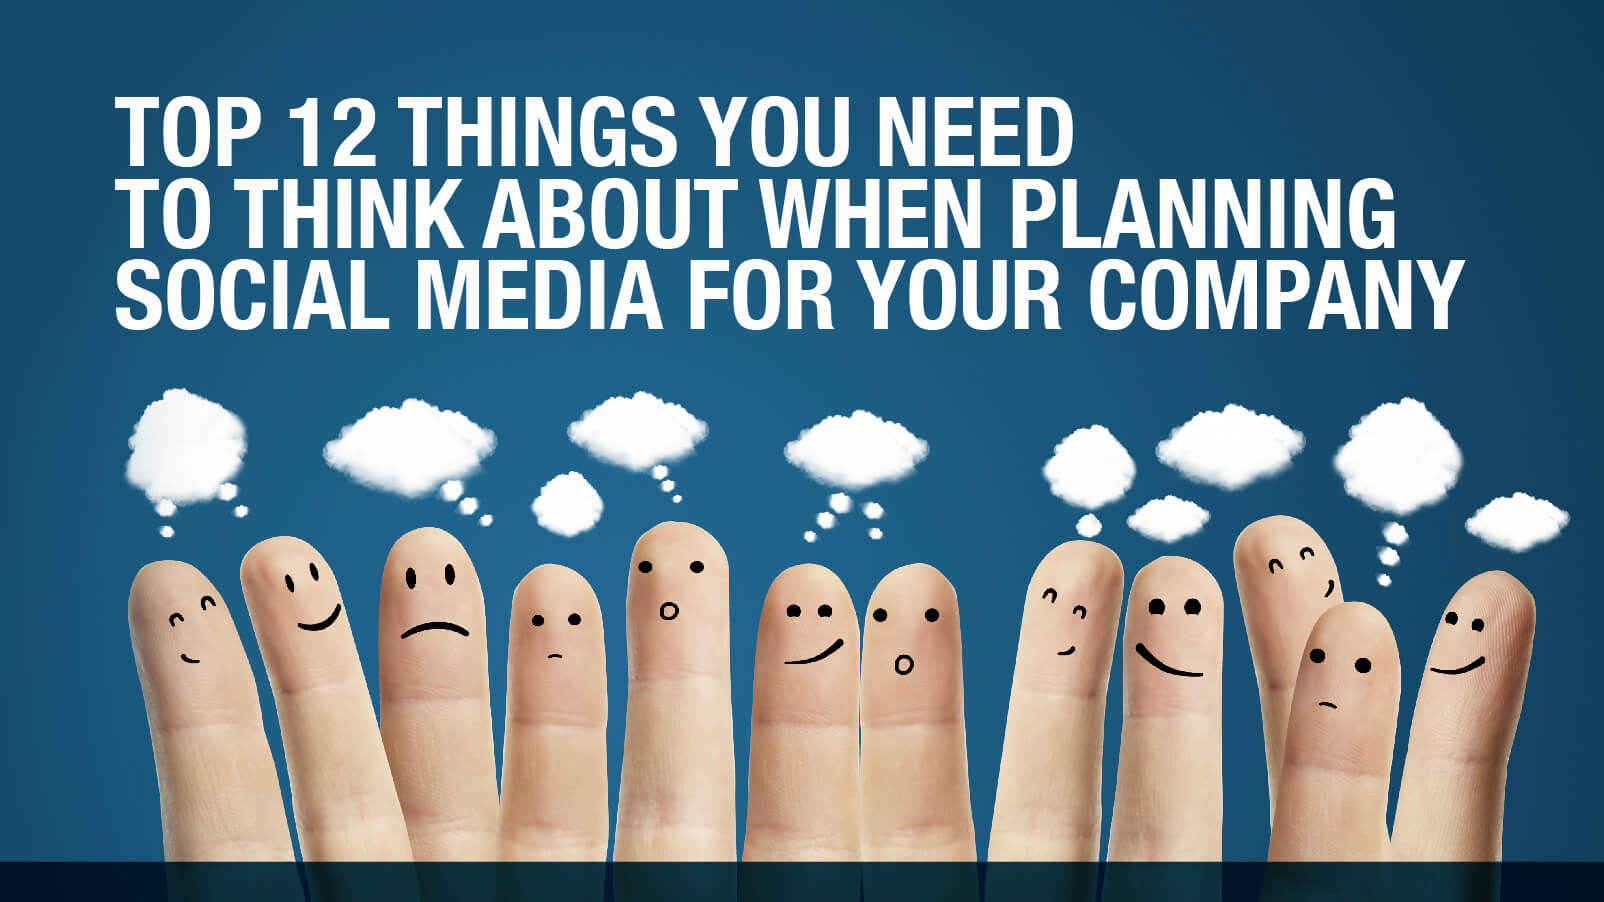 The Top 12 Things When Planning Social Media for Your Company